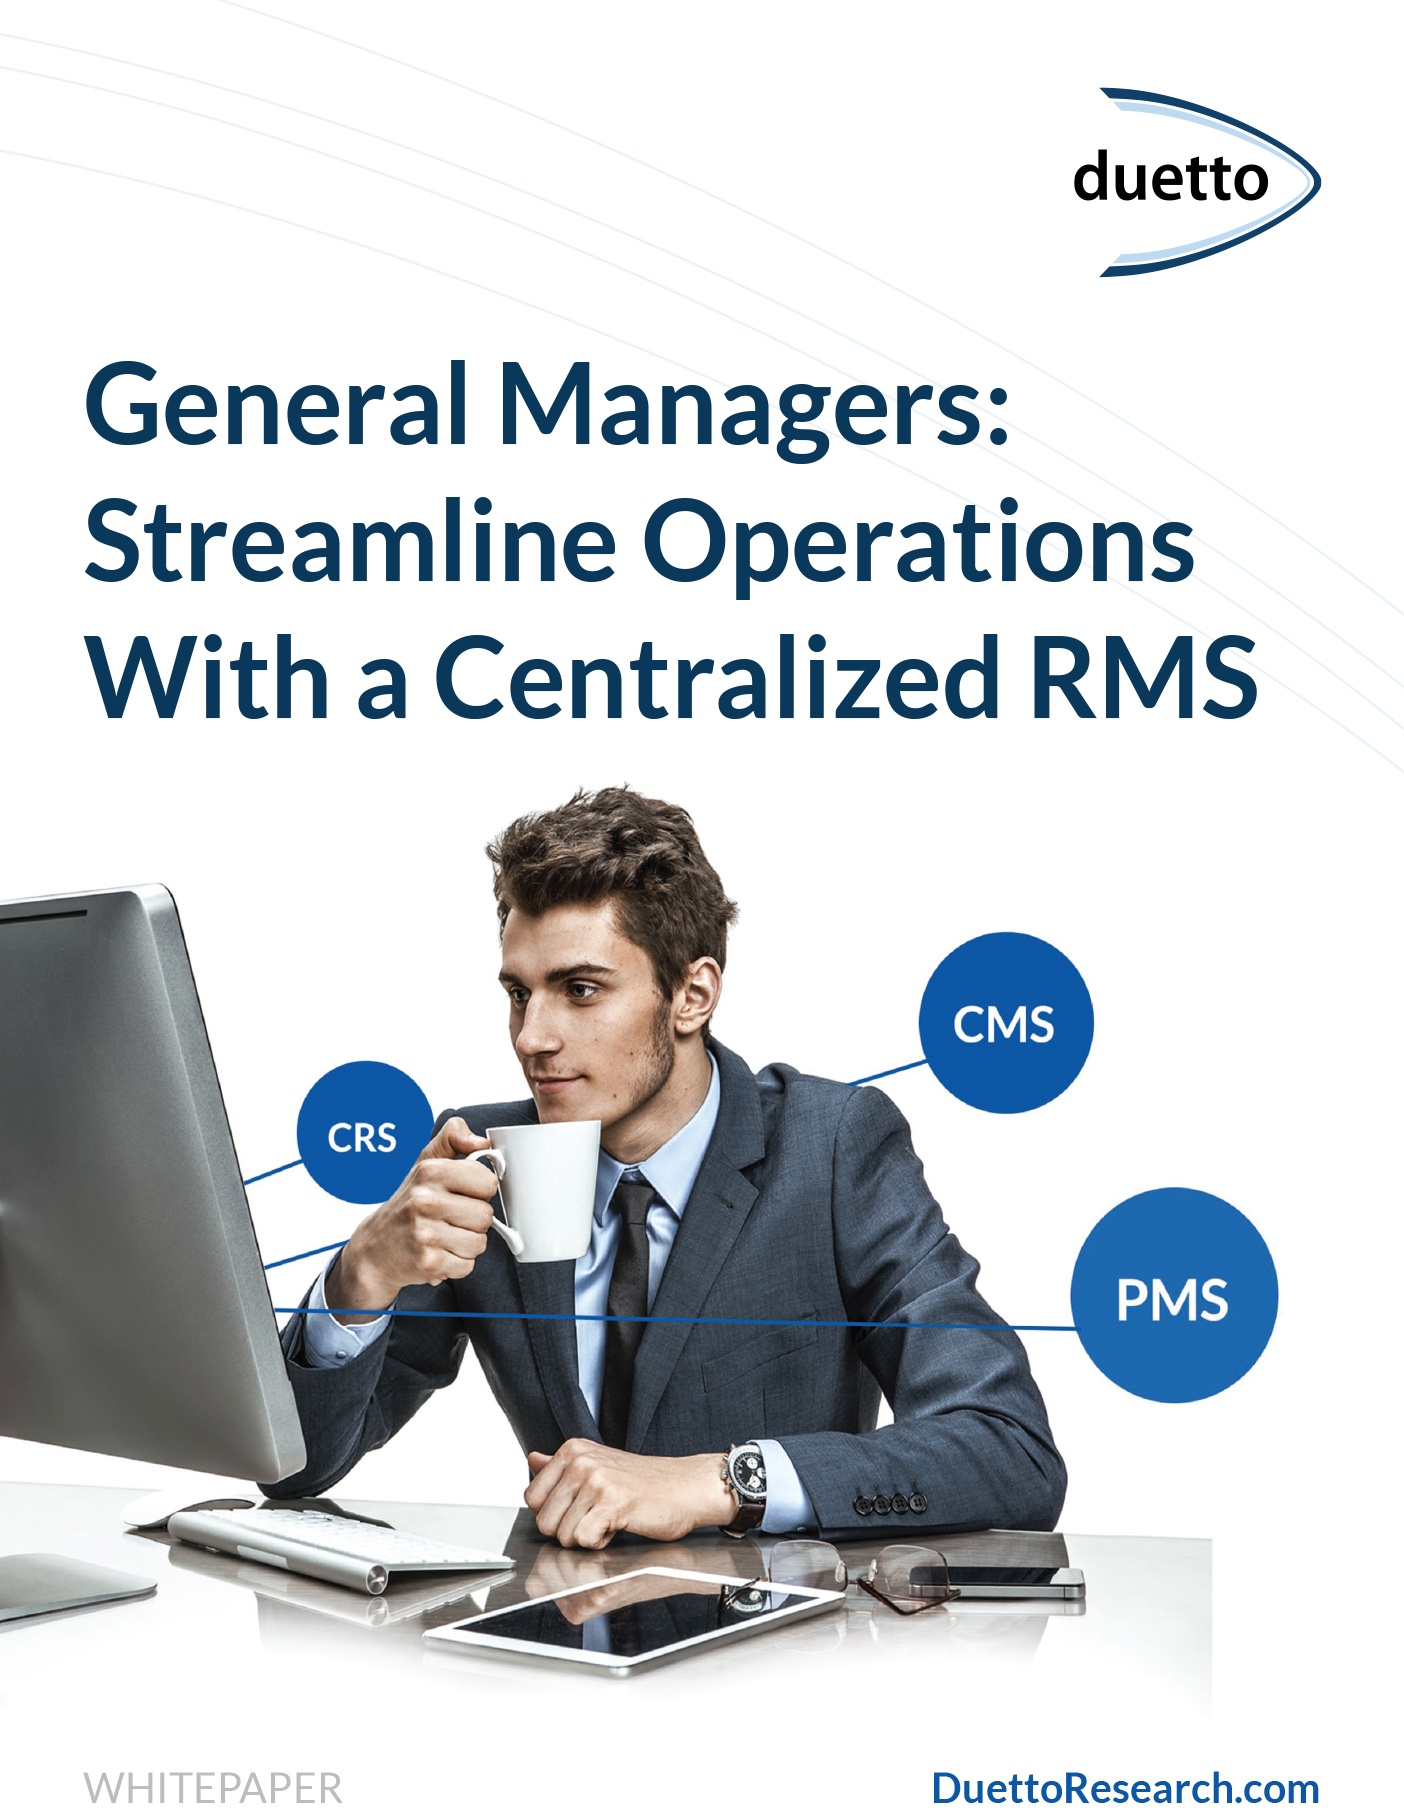 1_General-Managers-Streamline-Operations-With-a-Centralized-RMS.jpg